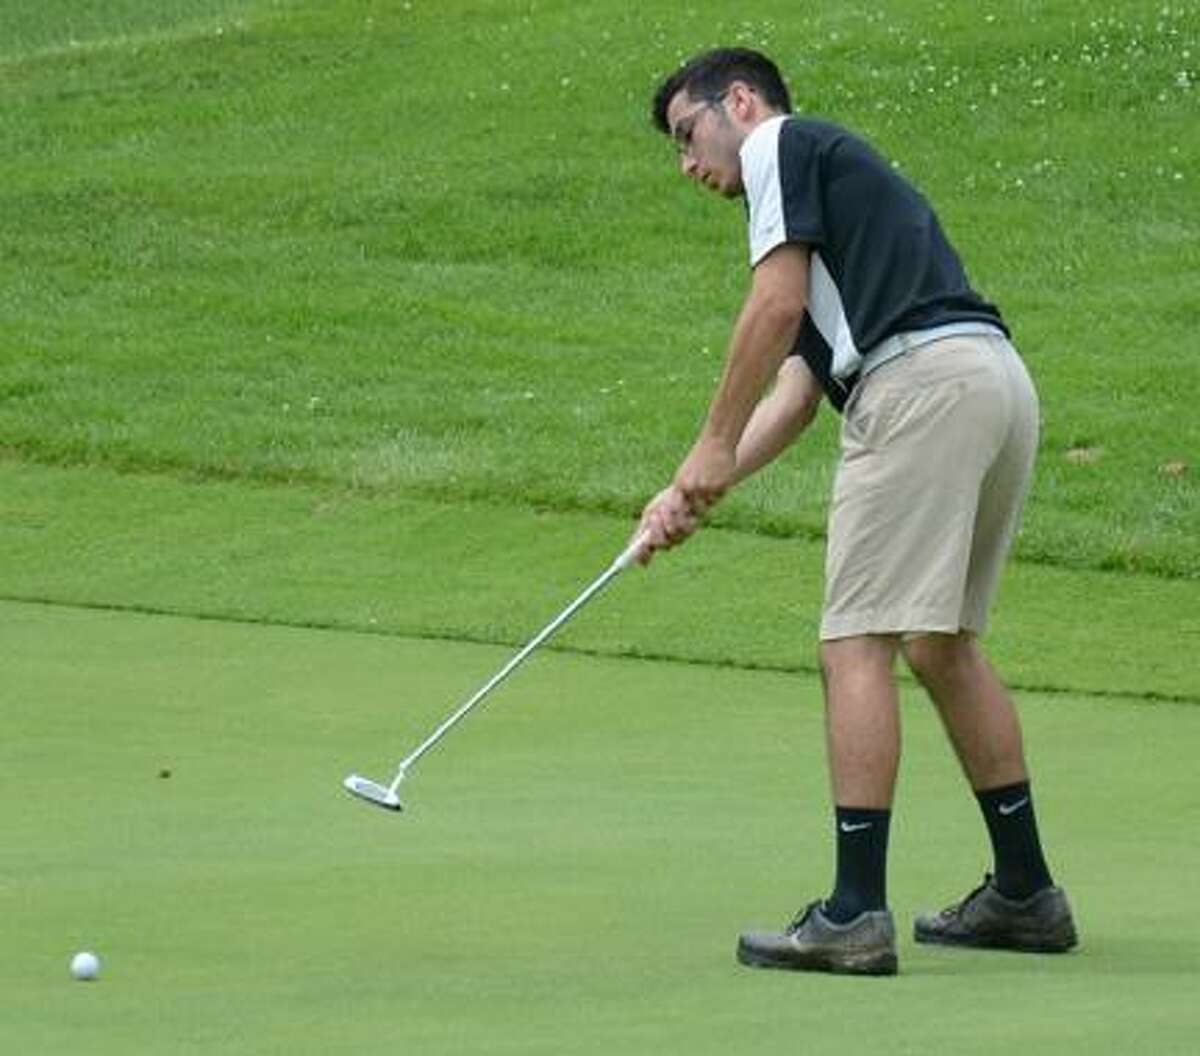 JESSI PIERCE - ONEIDA DAILY DISPATCH Camden's Evan Kessler putts during the Mohawk Valley Junior Golf Tour event at Valley View on Monday.